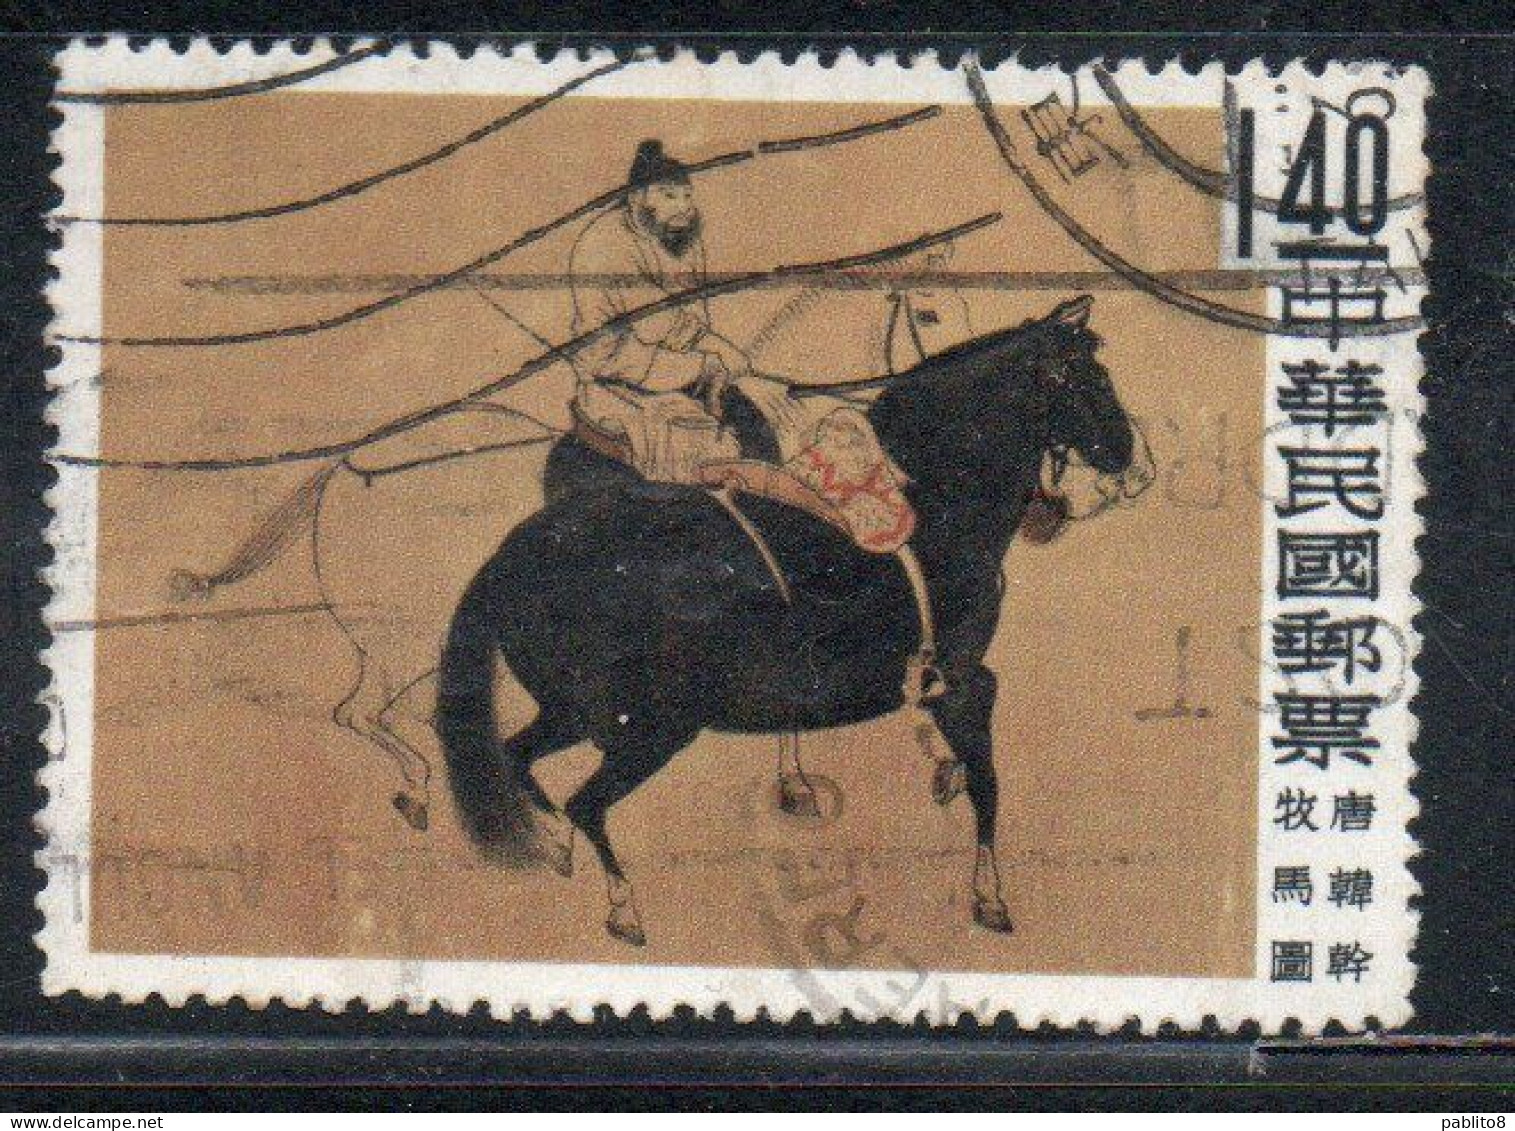 CHINA REPUBLIC CINA TAIWAN FORMOSA 1960 CHINESE PAINTINGS TWO HORSES AND GROOM BYHAN KAN 1.40$ USED USATO OBLITERE' - Usati